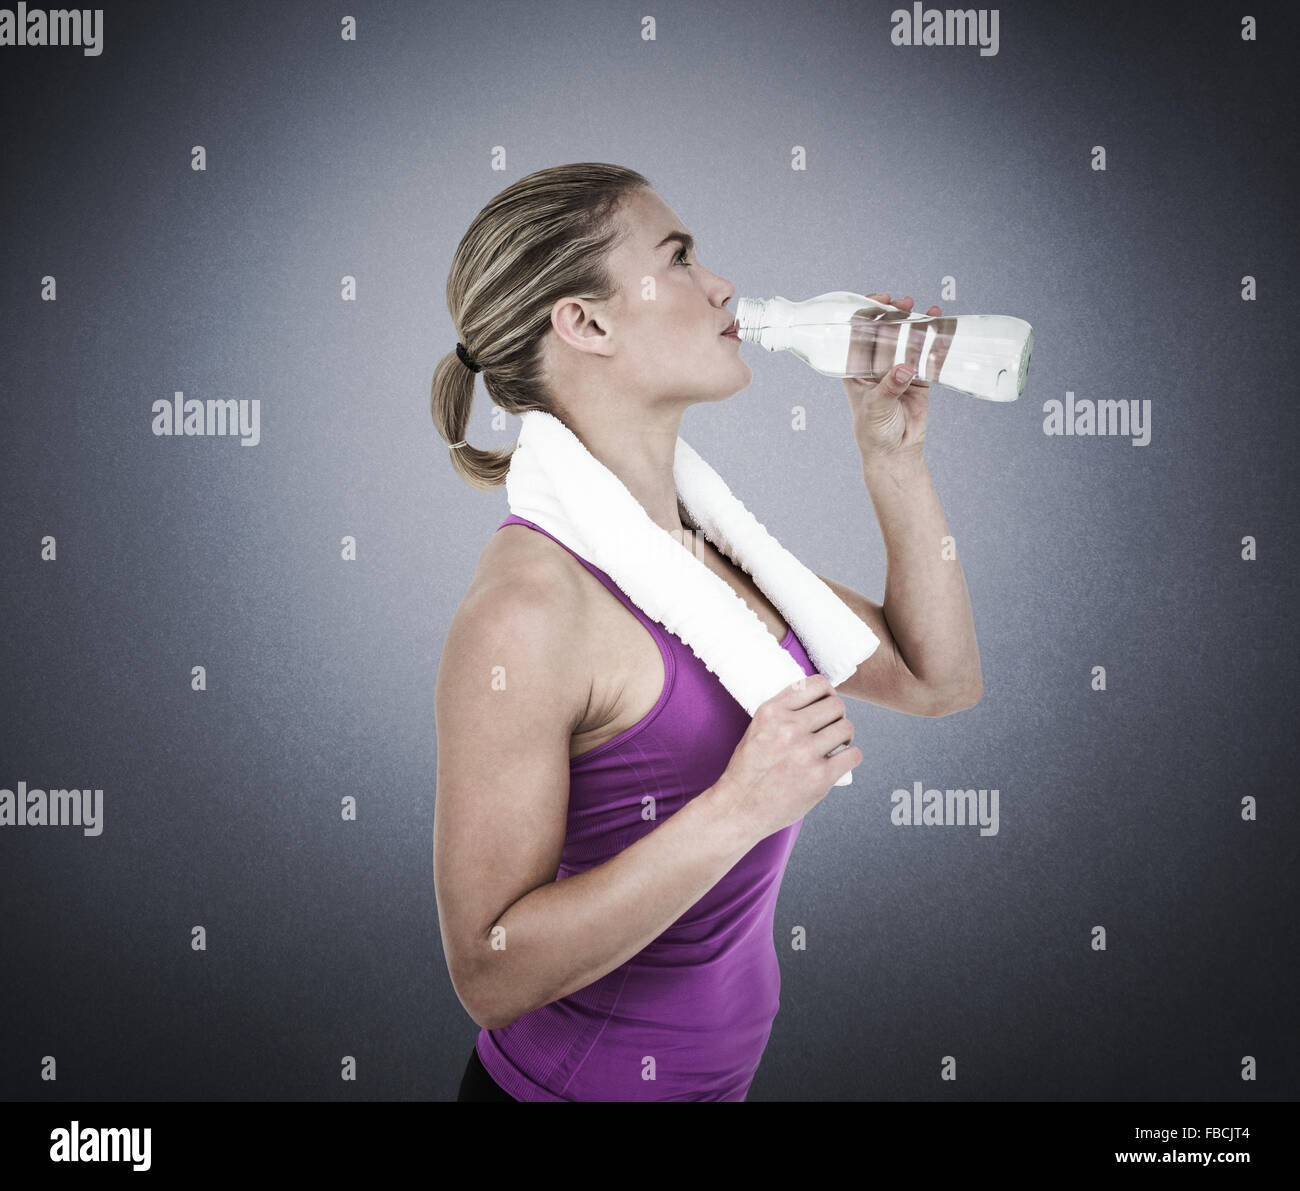 Composite image of muscular woman drinking water Stock Photo